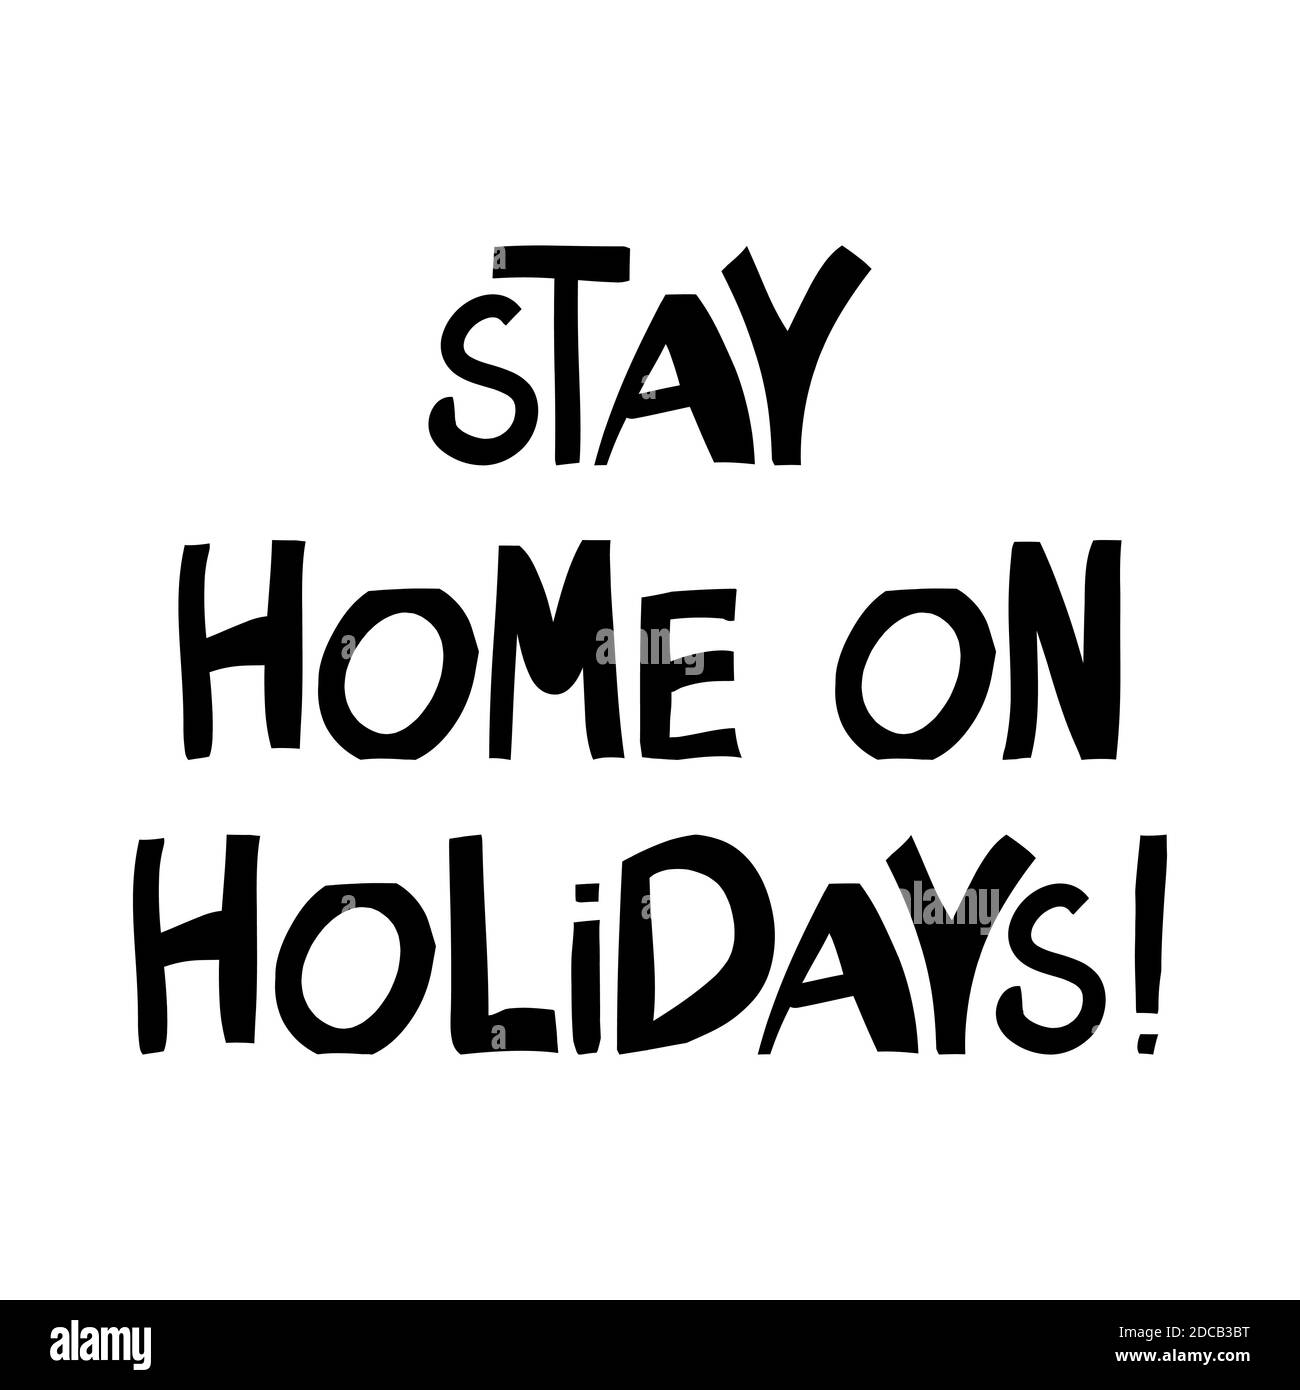 Stay home on holidays, handwritten lettering isolated on white Stock Vector